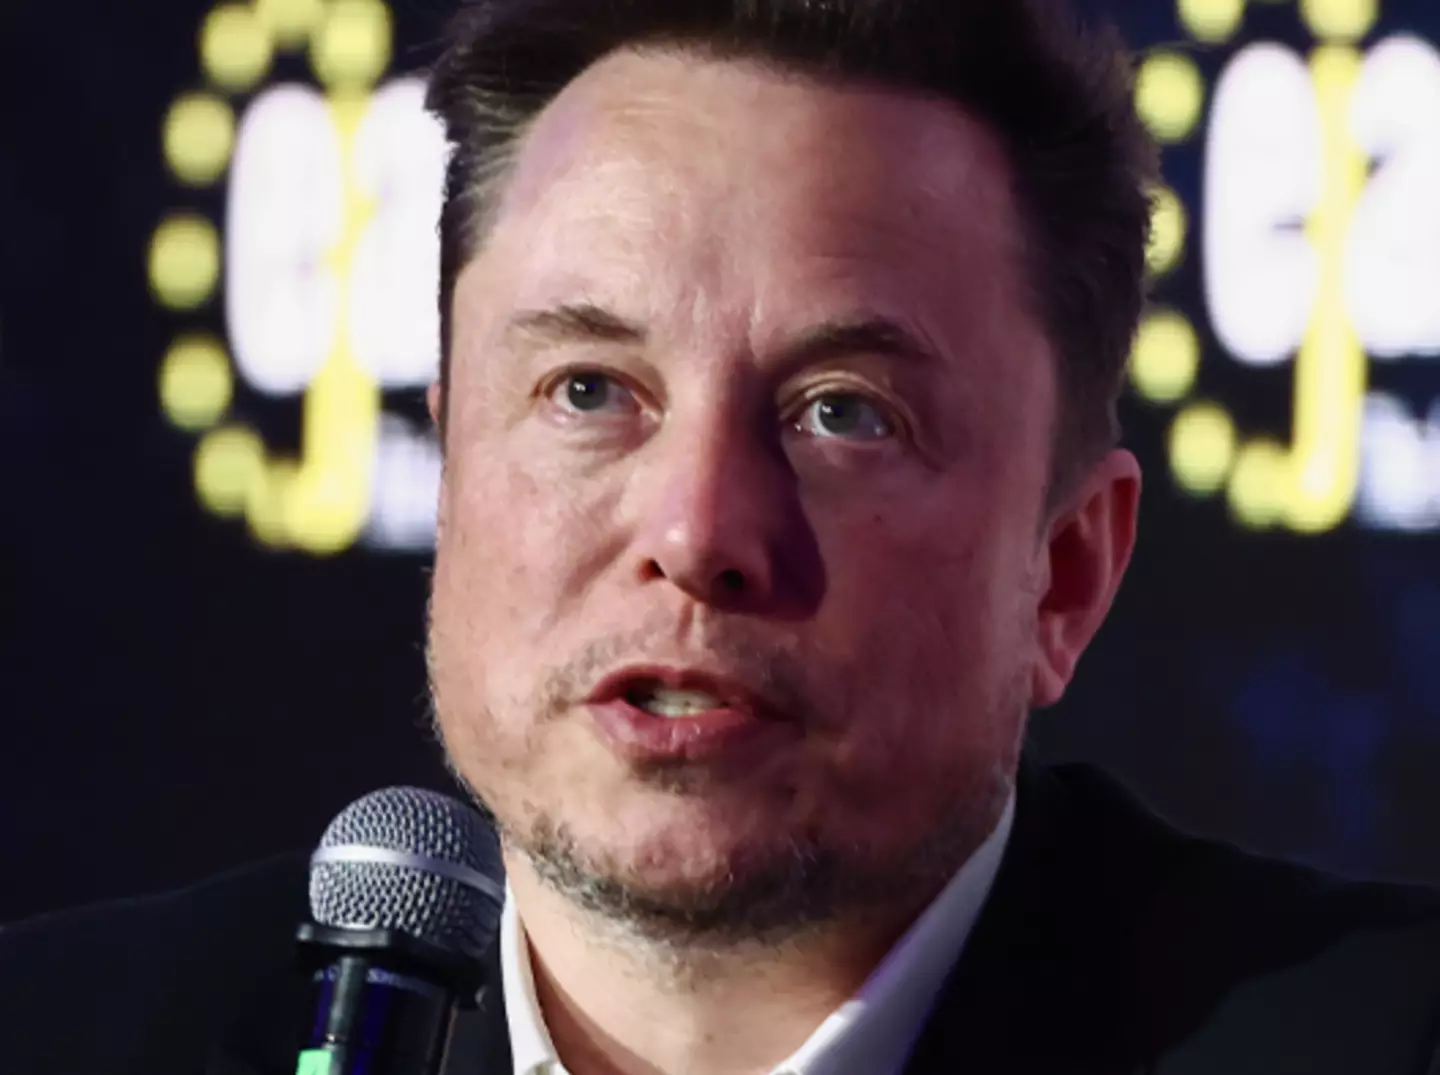 Elon Musk plans to get one of the implants himself.